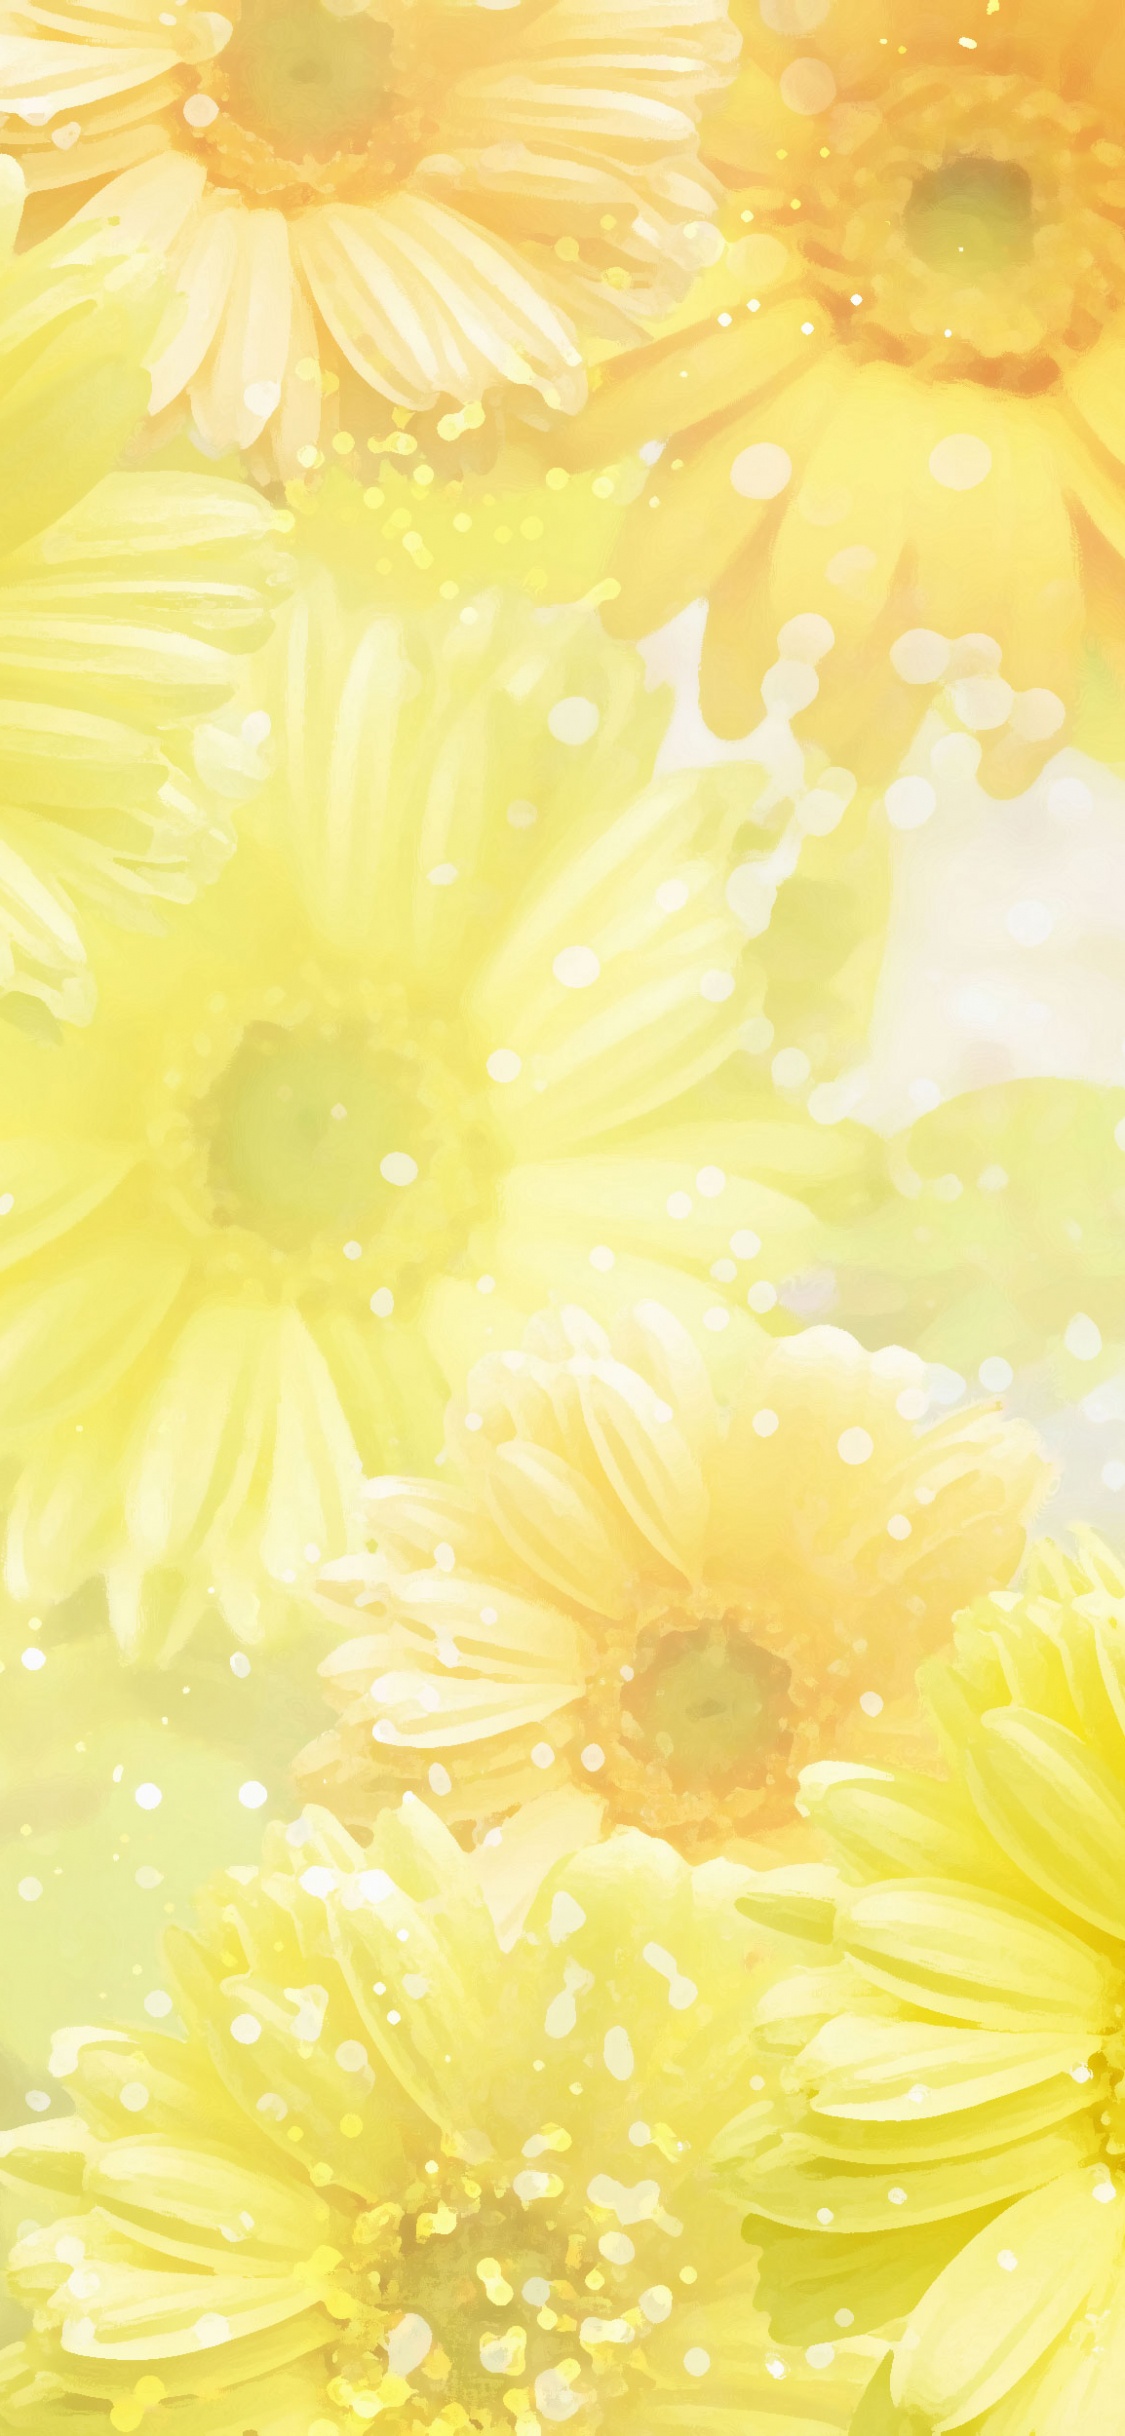 Yellow and White Daisy Flower. Wallpaper in 1125x2436 Resolution